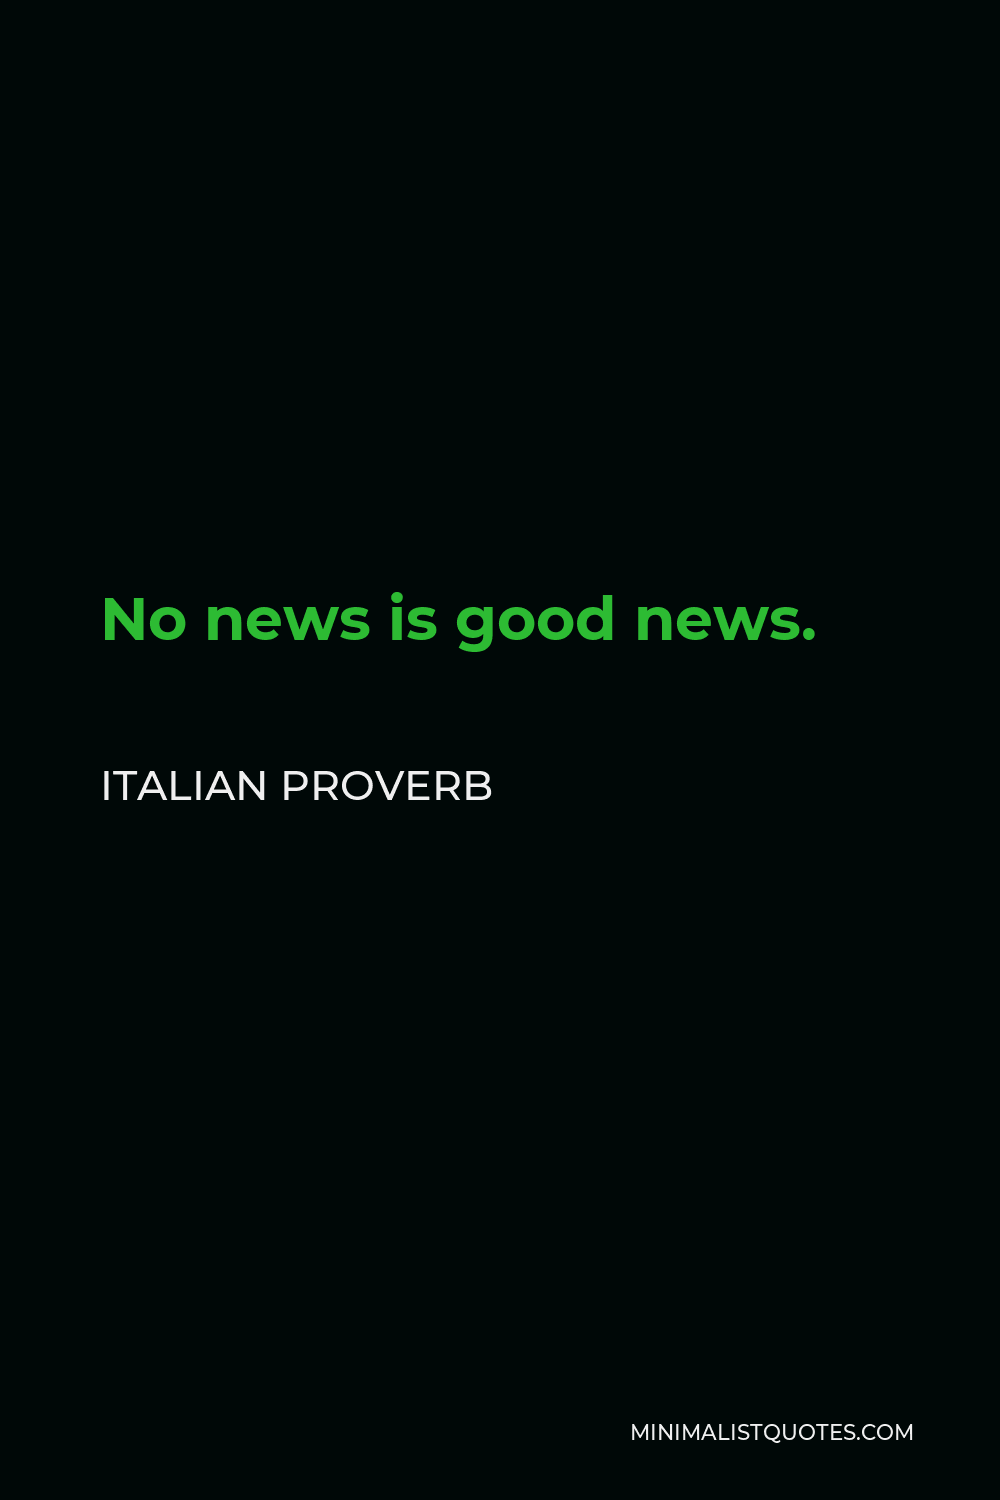 Italian Proverb Quote - No news is good news.